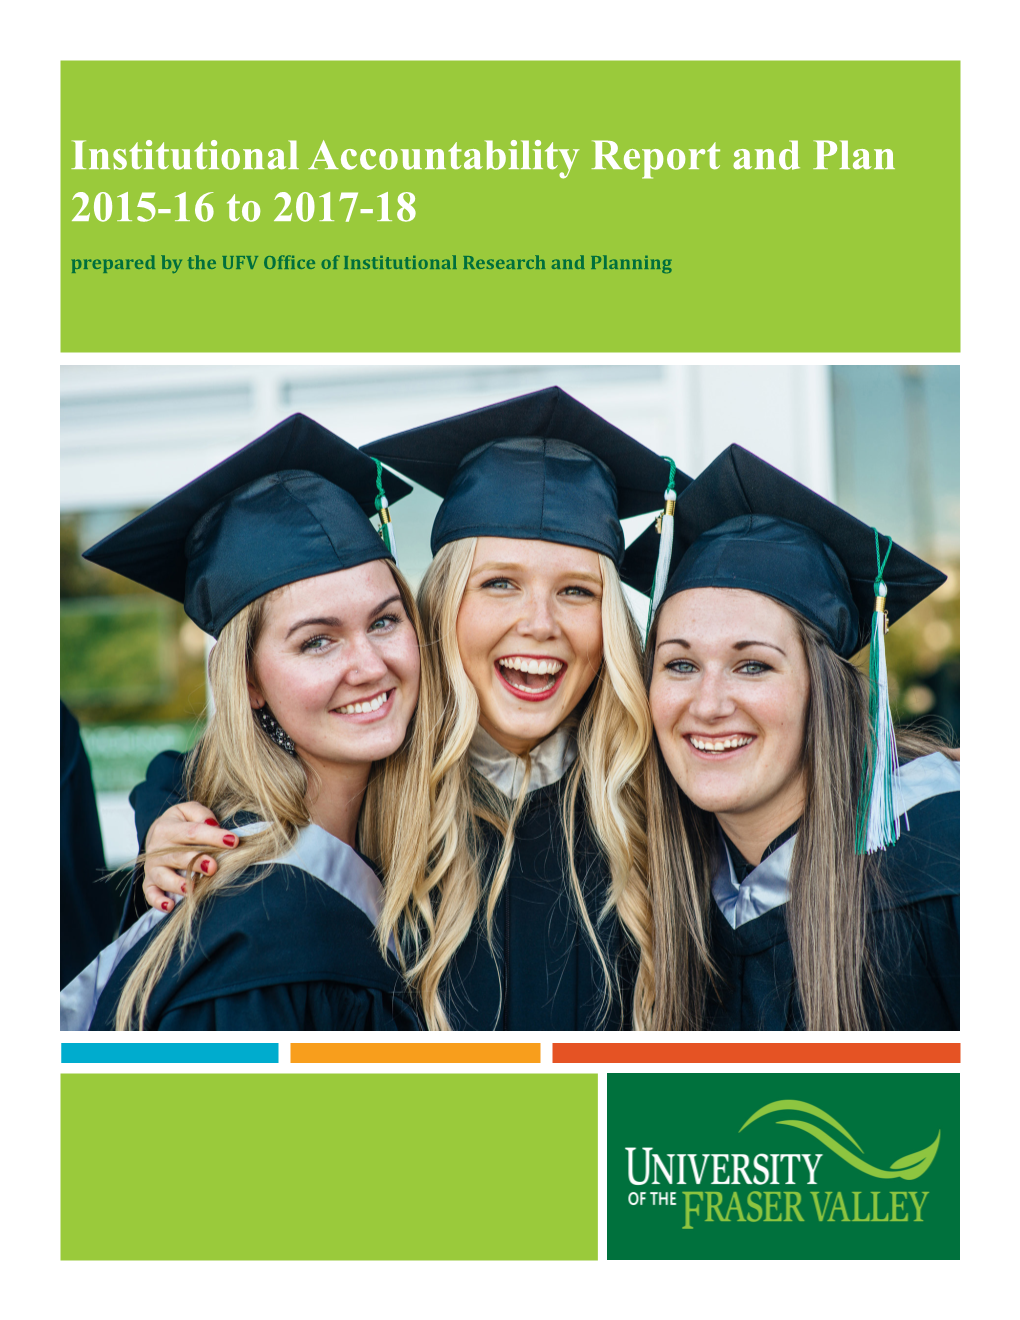 Institutional Accountability Report and Plan 2015-16 to 2017-18 Prepared by the UFV Office of Institutional Research and Planning